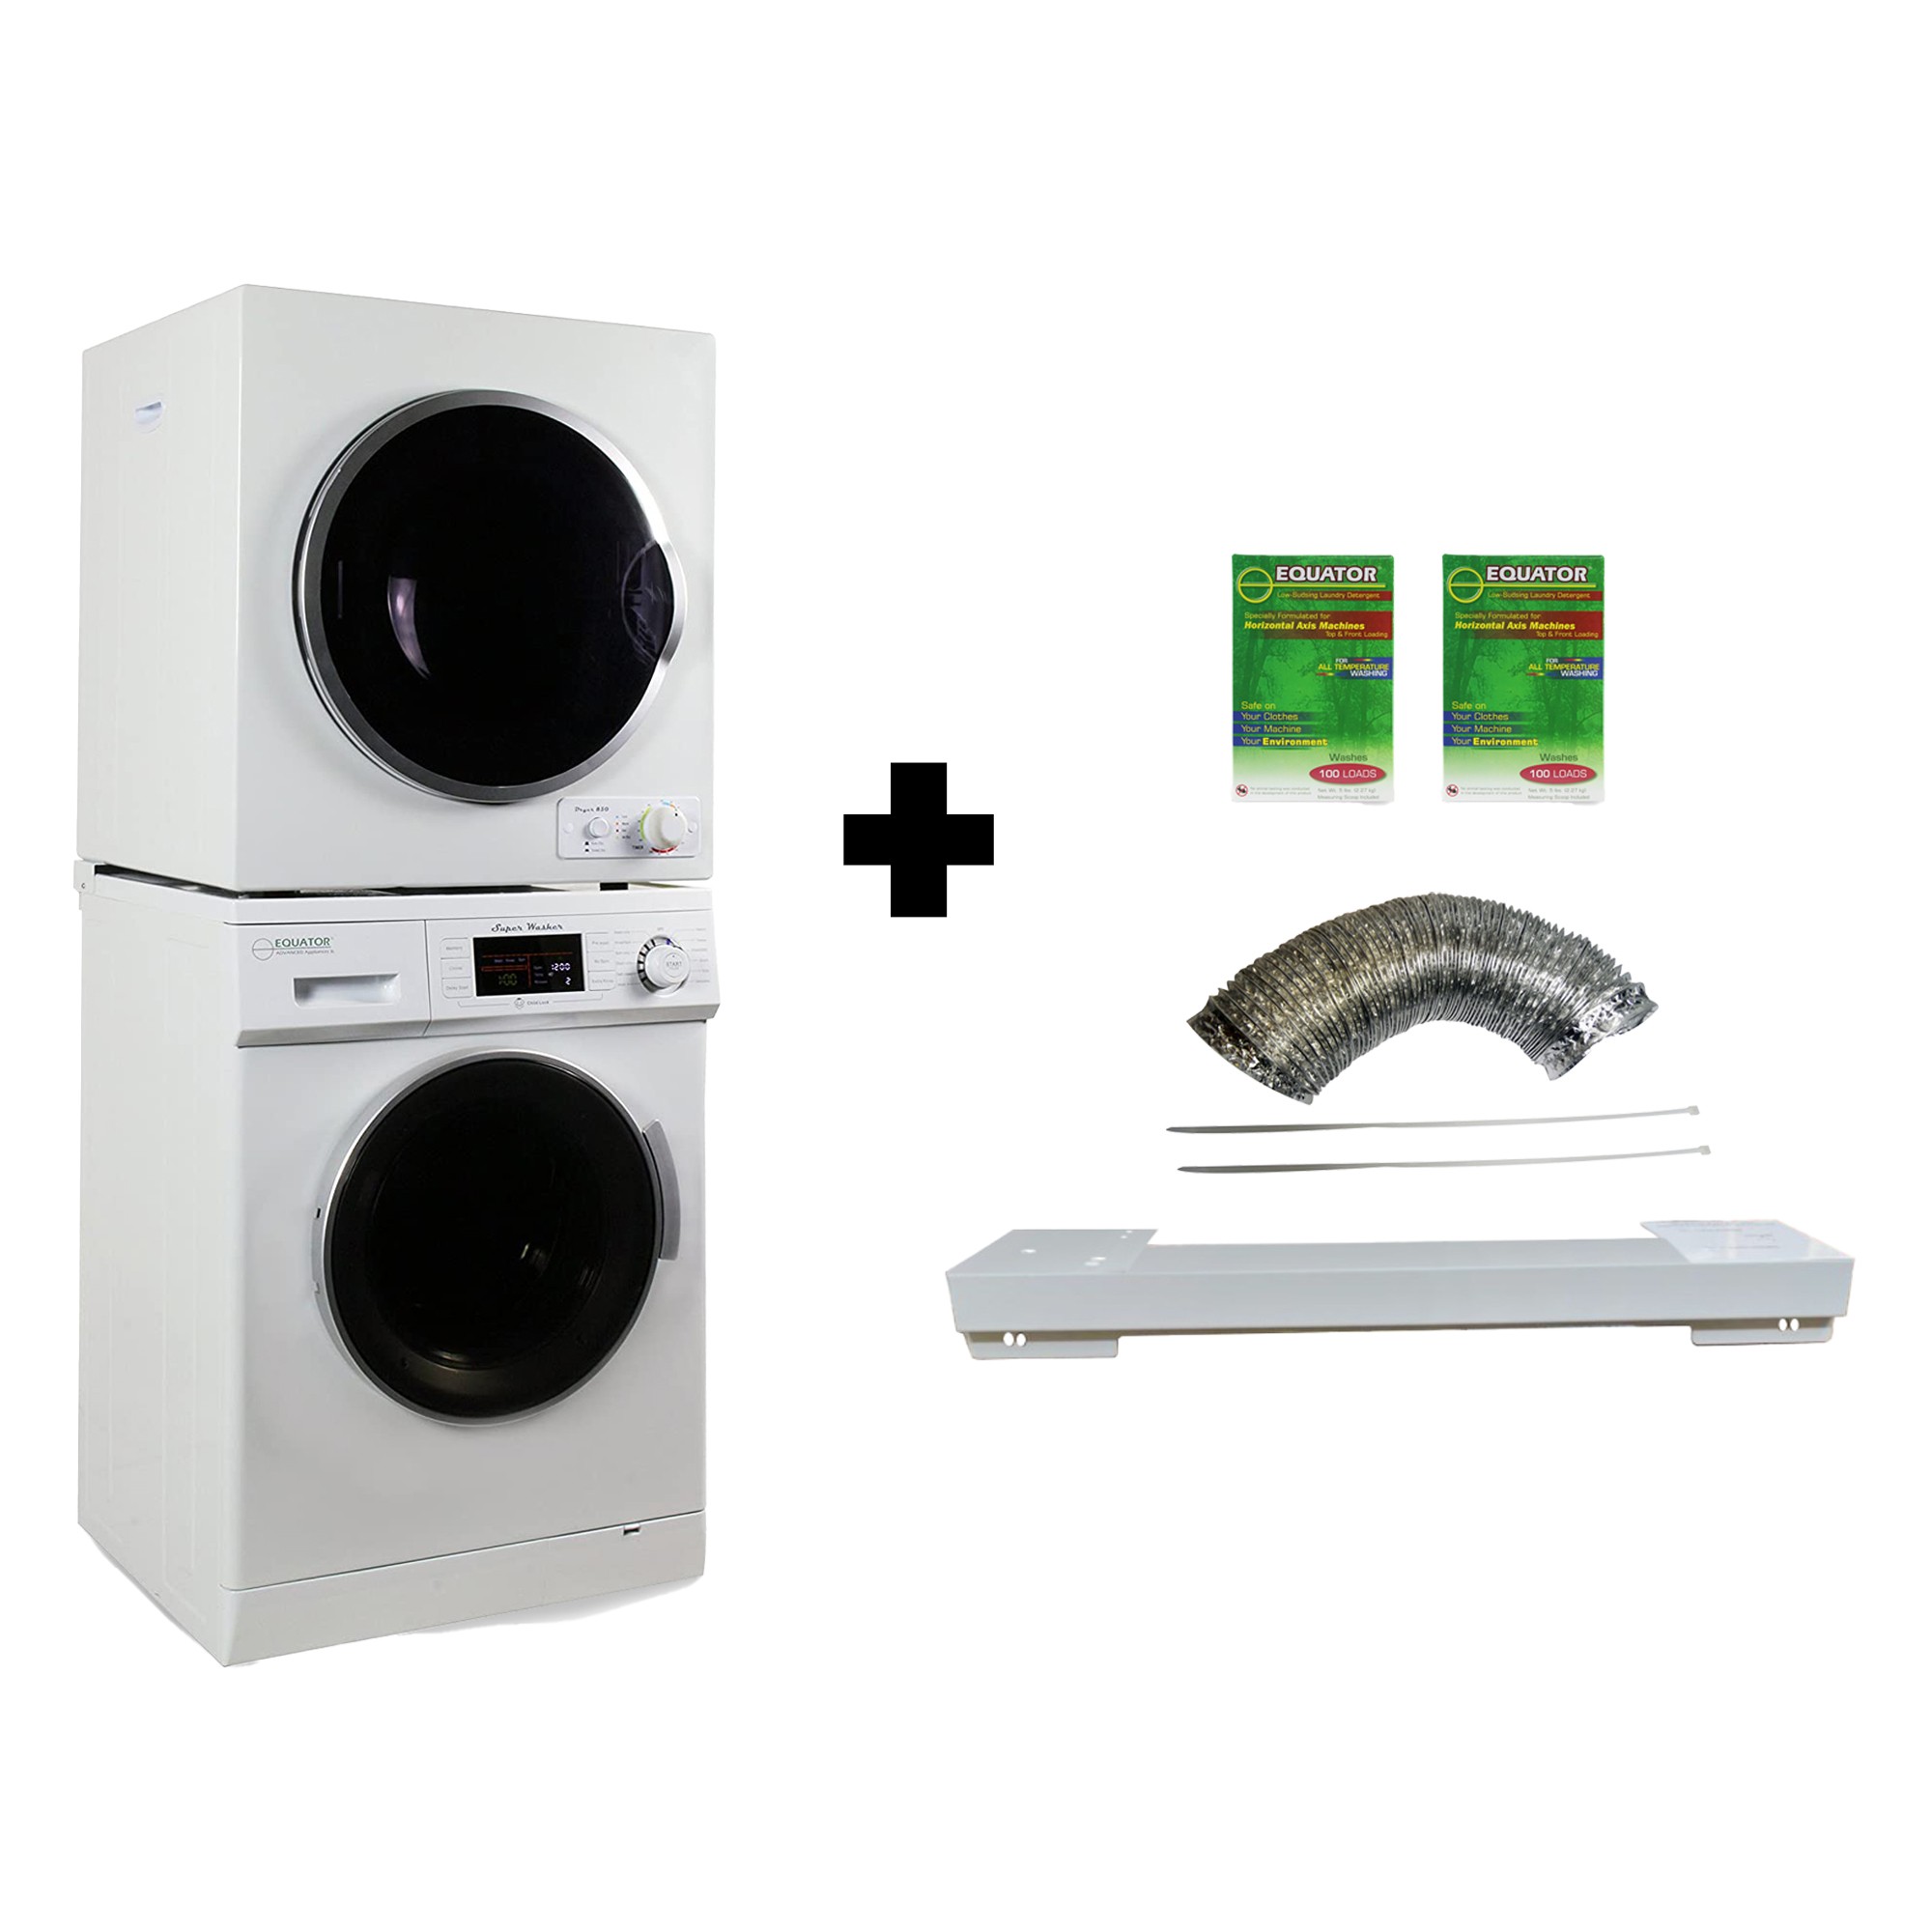 Equator 13lbs White Compact Washer 13lbs White Compact Dryer - Stackable Set	(with two boxes of HE Detergent)			